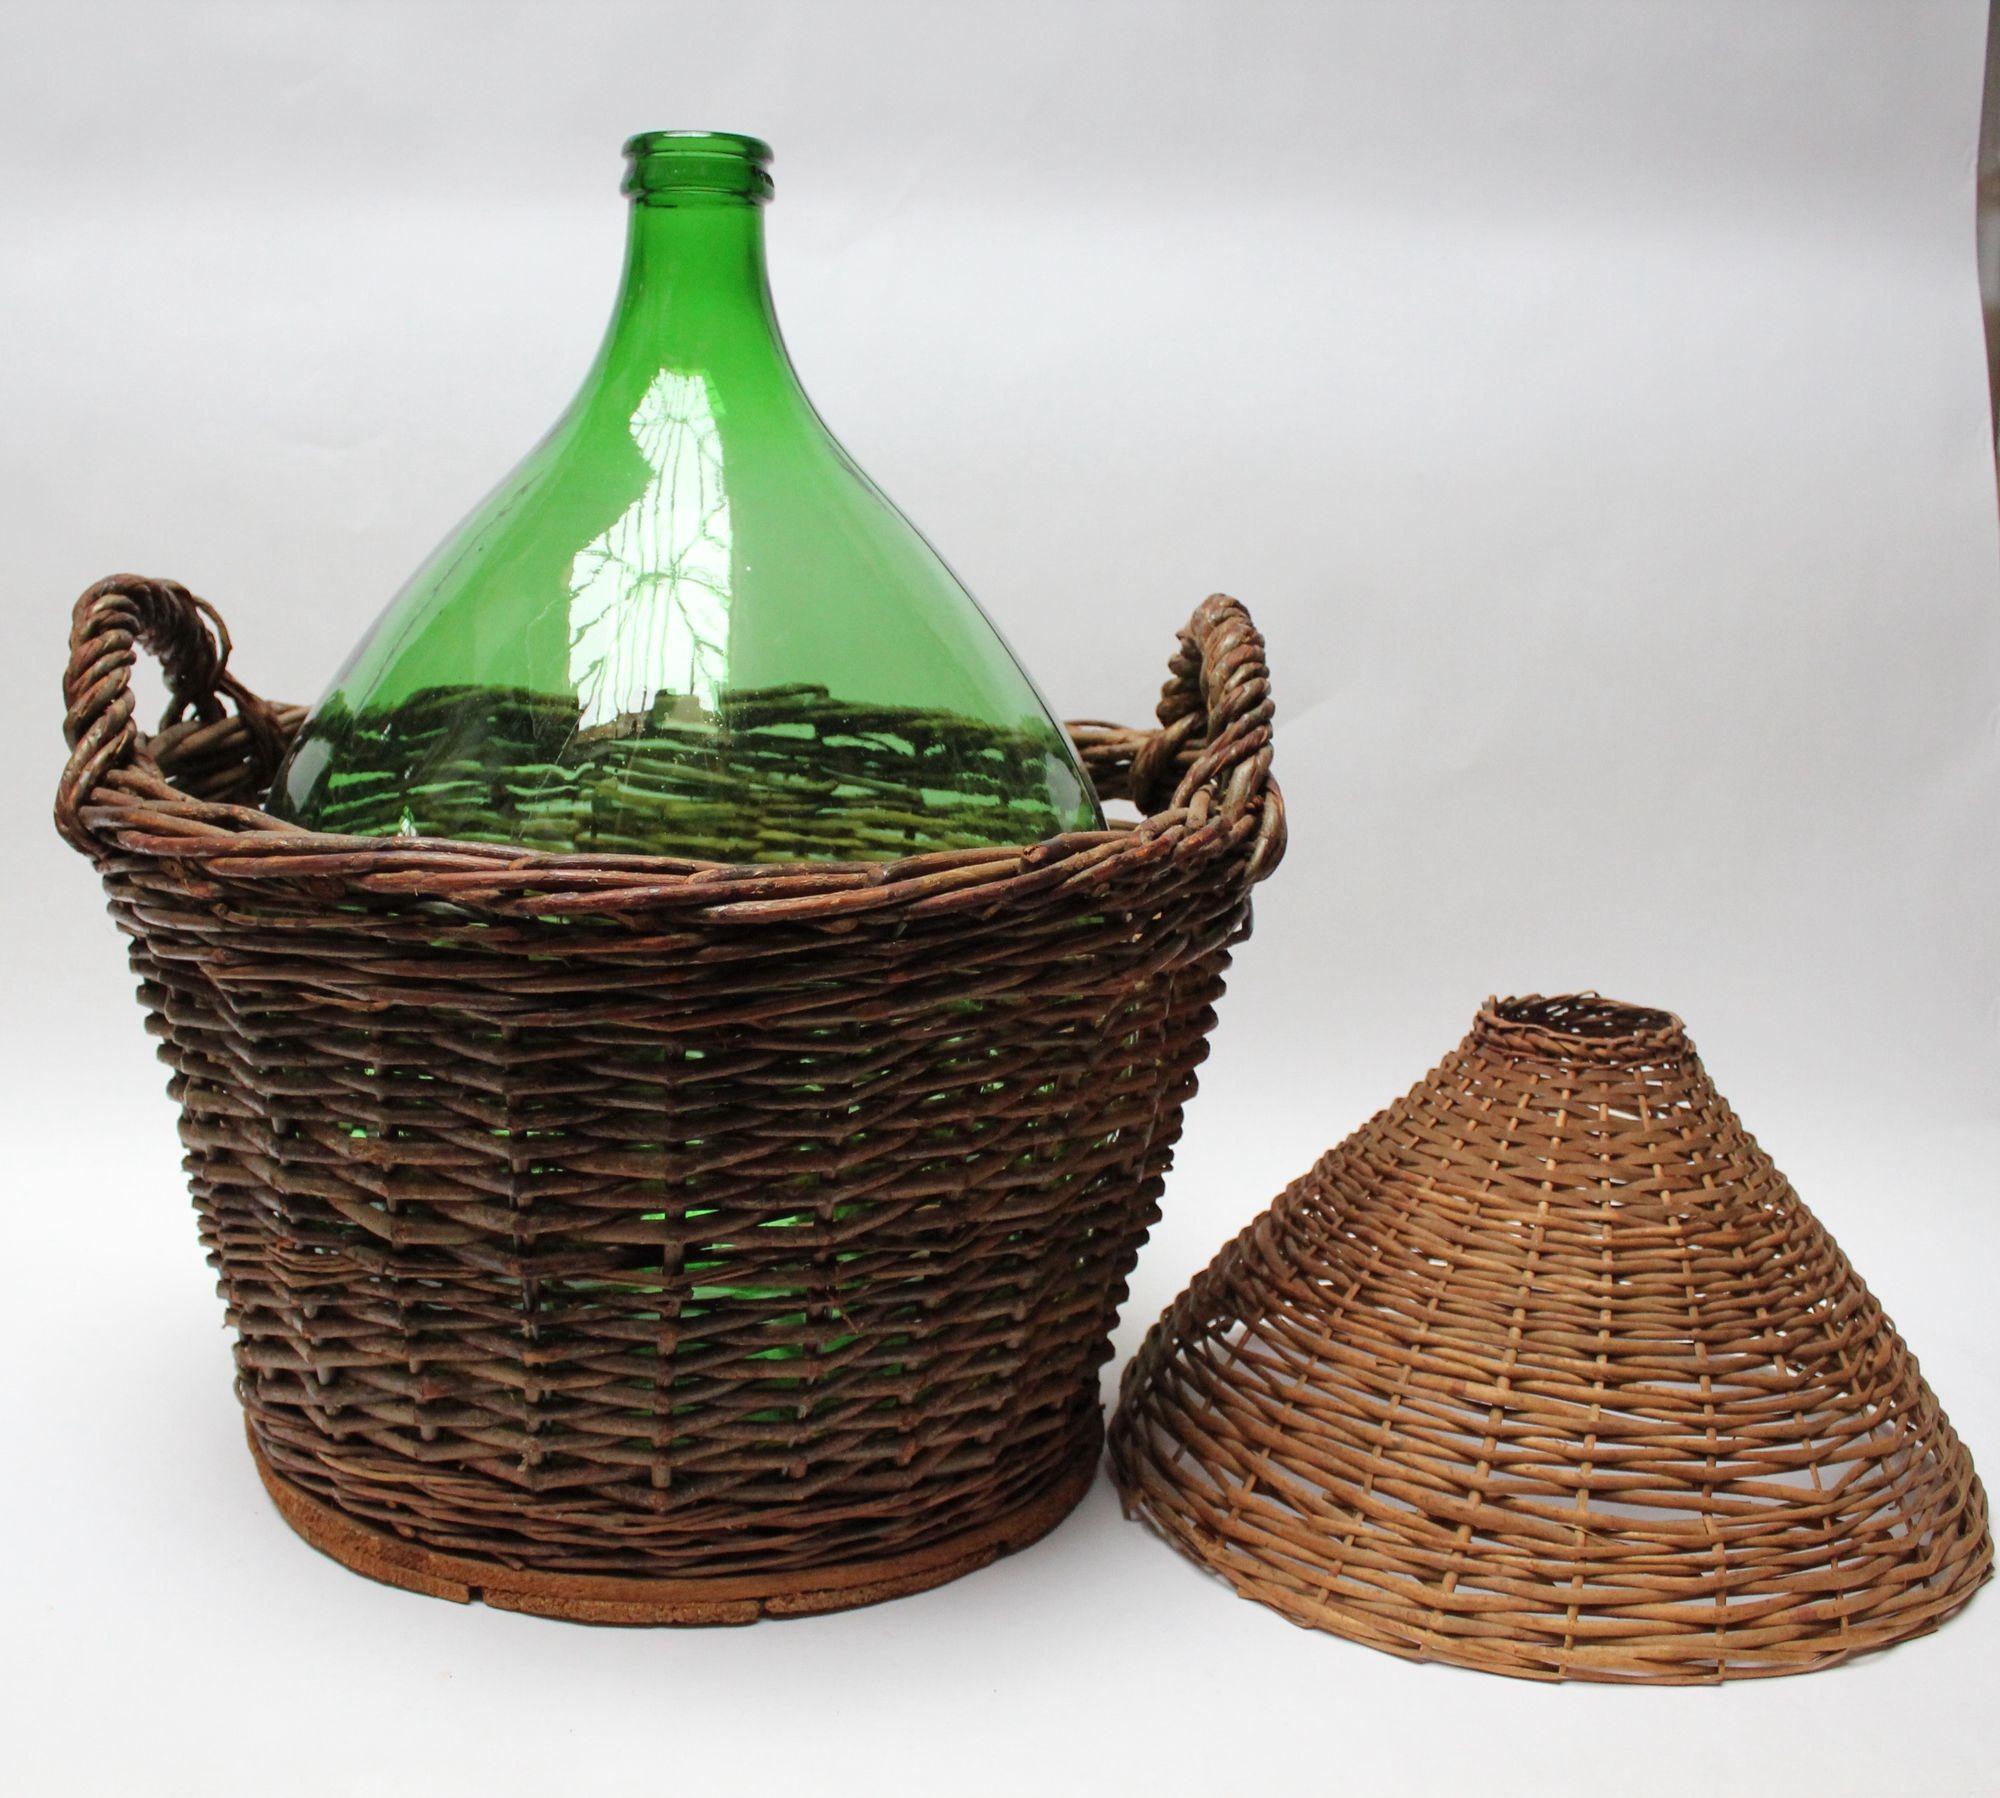 Large green glass 54-liter demijohn/carboy with wicker carrier originally used for transporting wine produced by Villani (ca. mid-20th Century, Italy).
Few long scratches to glass along with general, age-commensurate wear. Basket is structurally